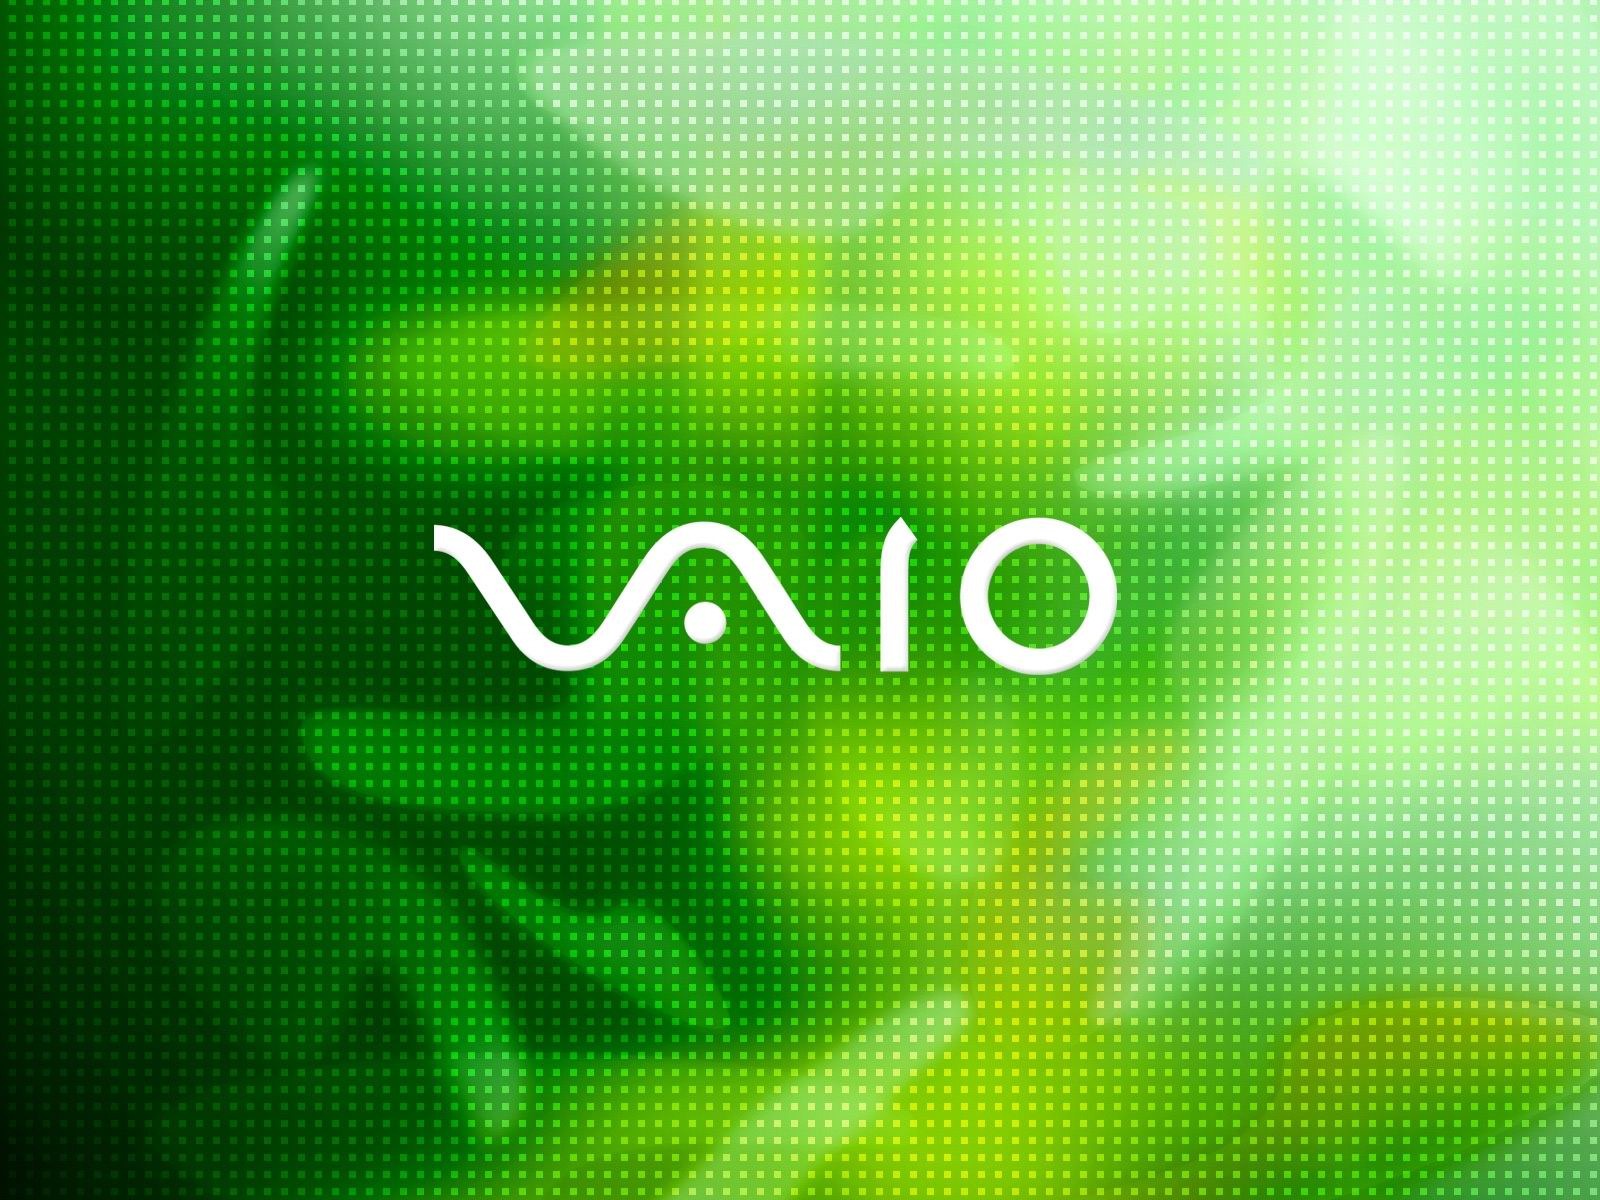 Sony Vaio Wallpaper Sony Vaio Computers Wallpapers In Jpg Format For Free Download